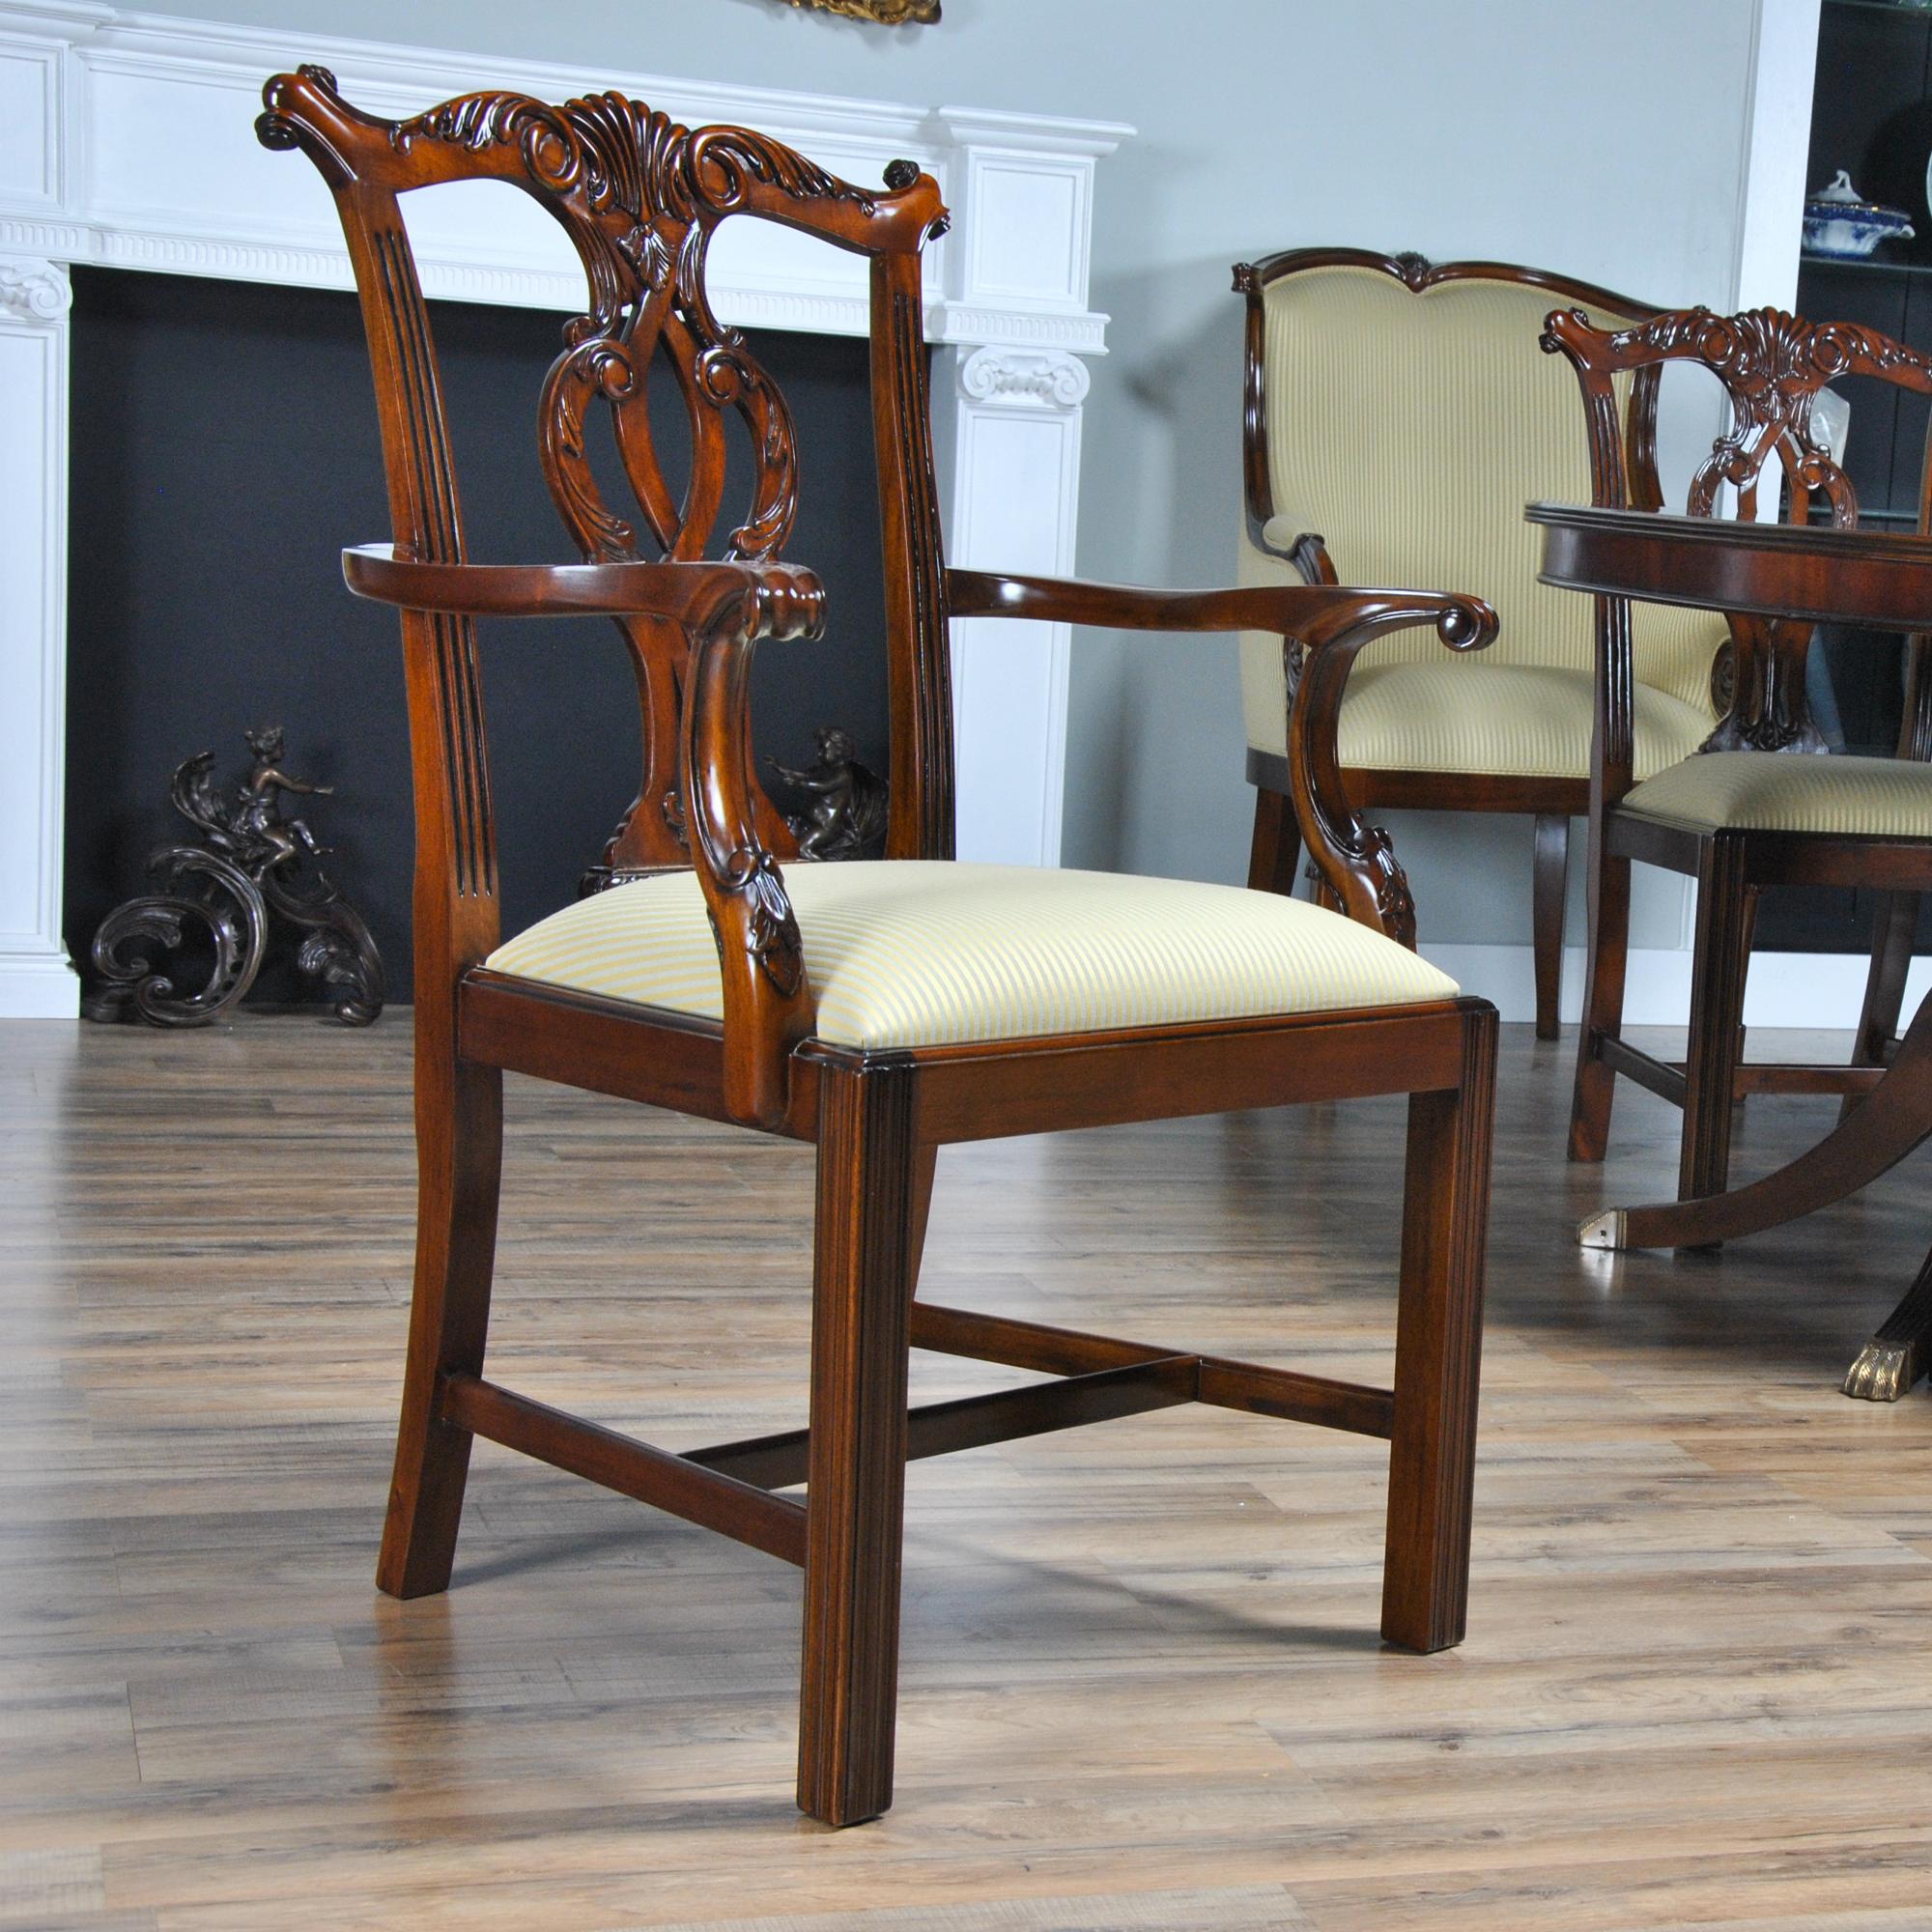 A set of ten Solid Mahogany Chippendale Chairs, the set consisting of 2 arm chairs and 8 side chairs. Each chair features serpentine crest rails and hand carved and pierced solid mahogany back splats. The armchairs features scrolled arms at a height